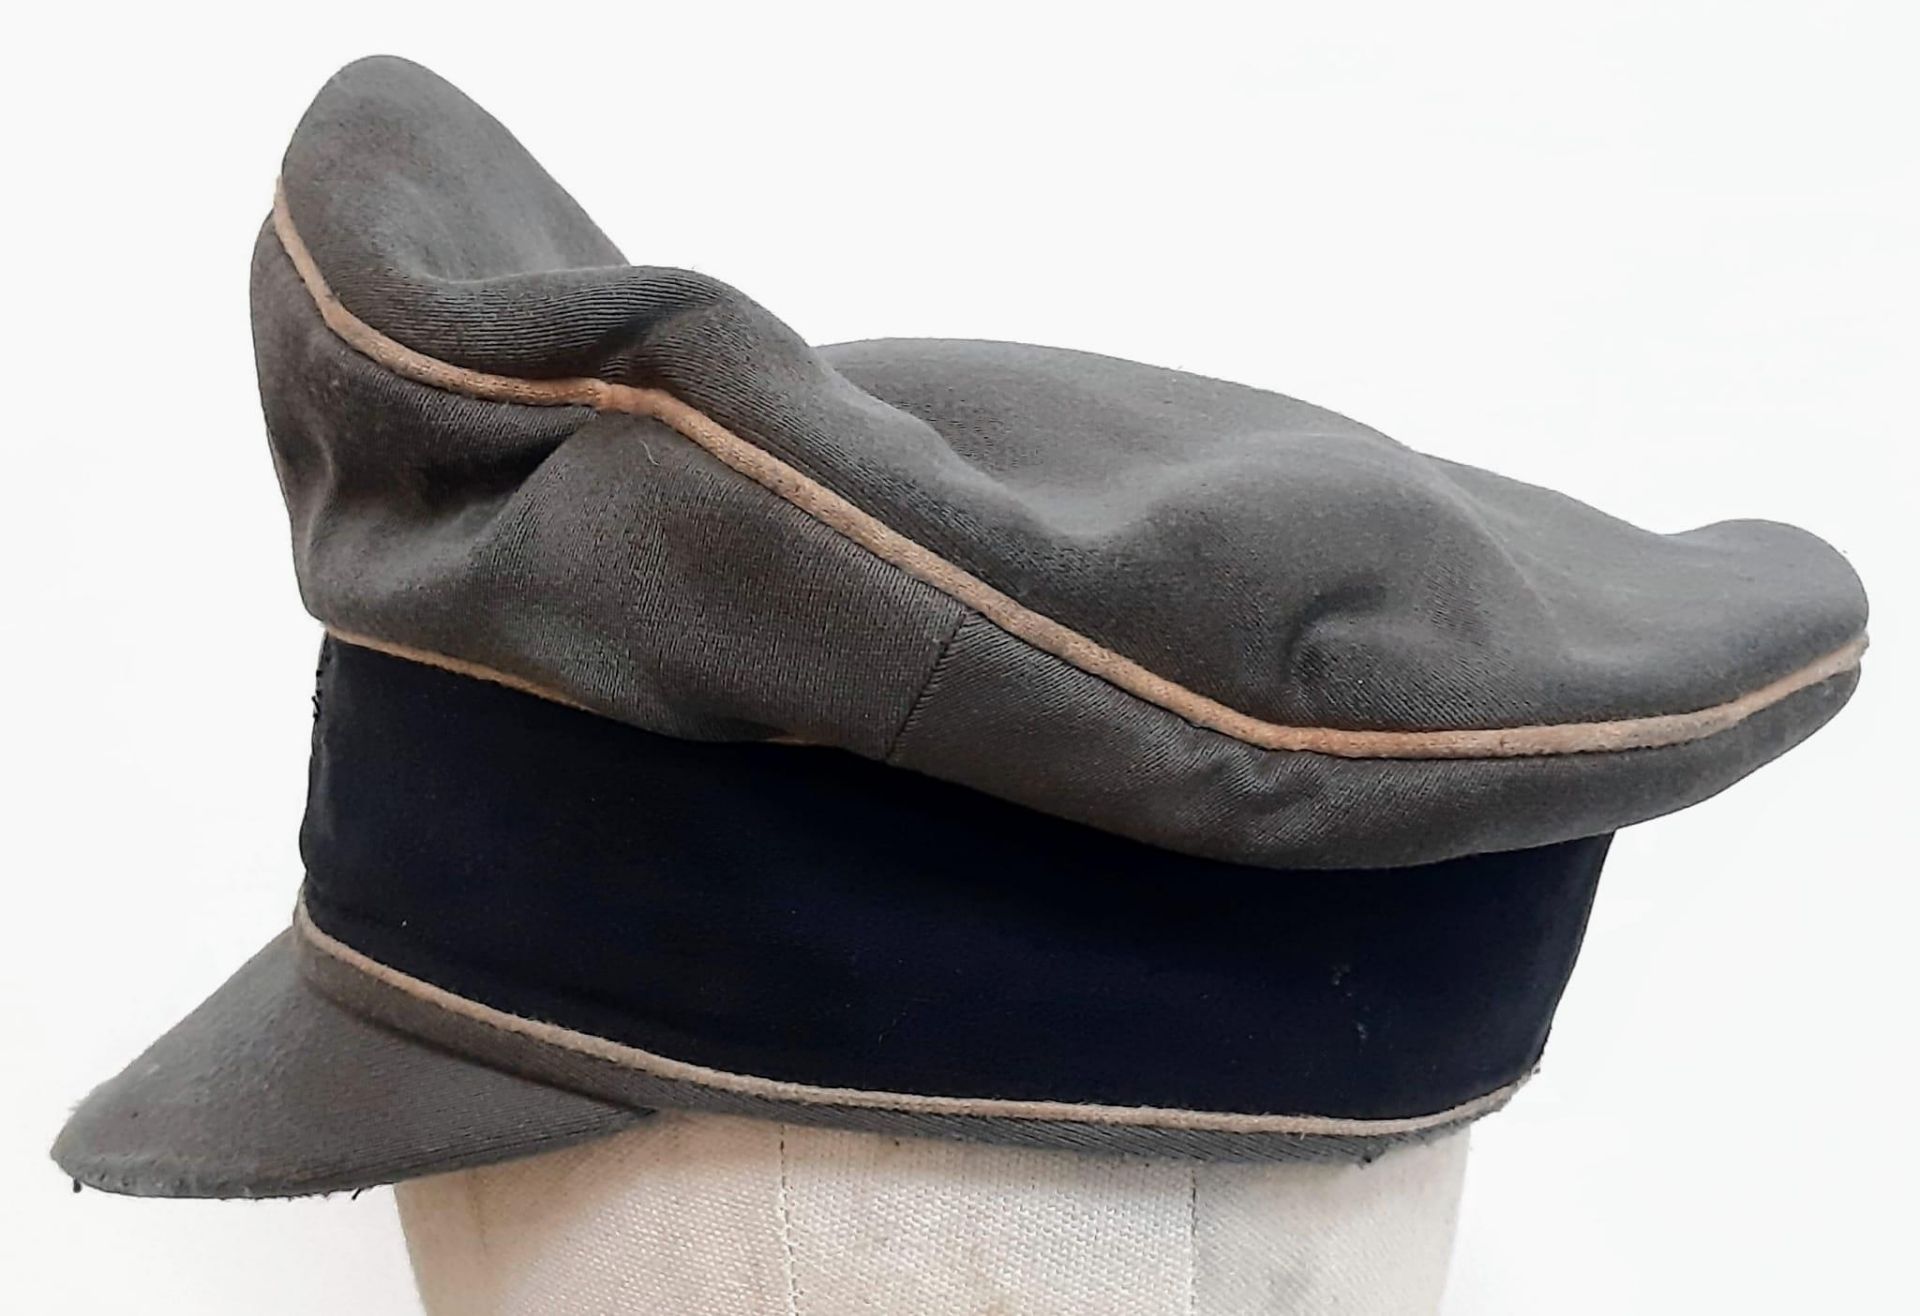 3rd Reich Waffen SS Trikot Crusher Cap with White Piping. A real “been there” example. - Bild 2 aus 6